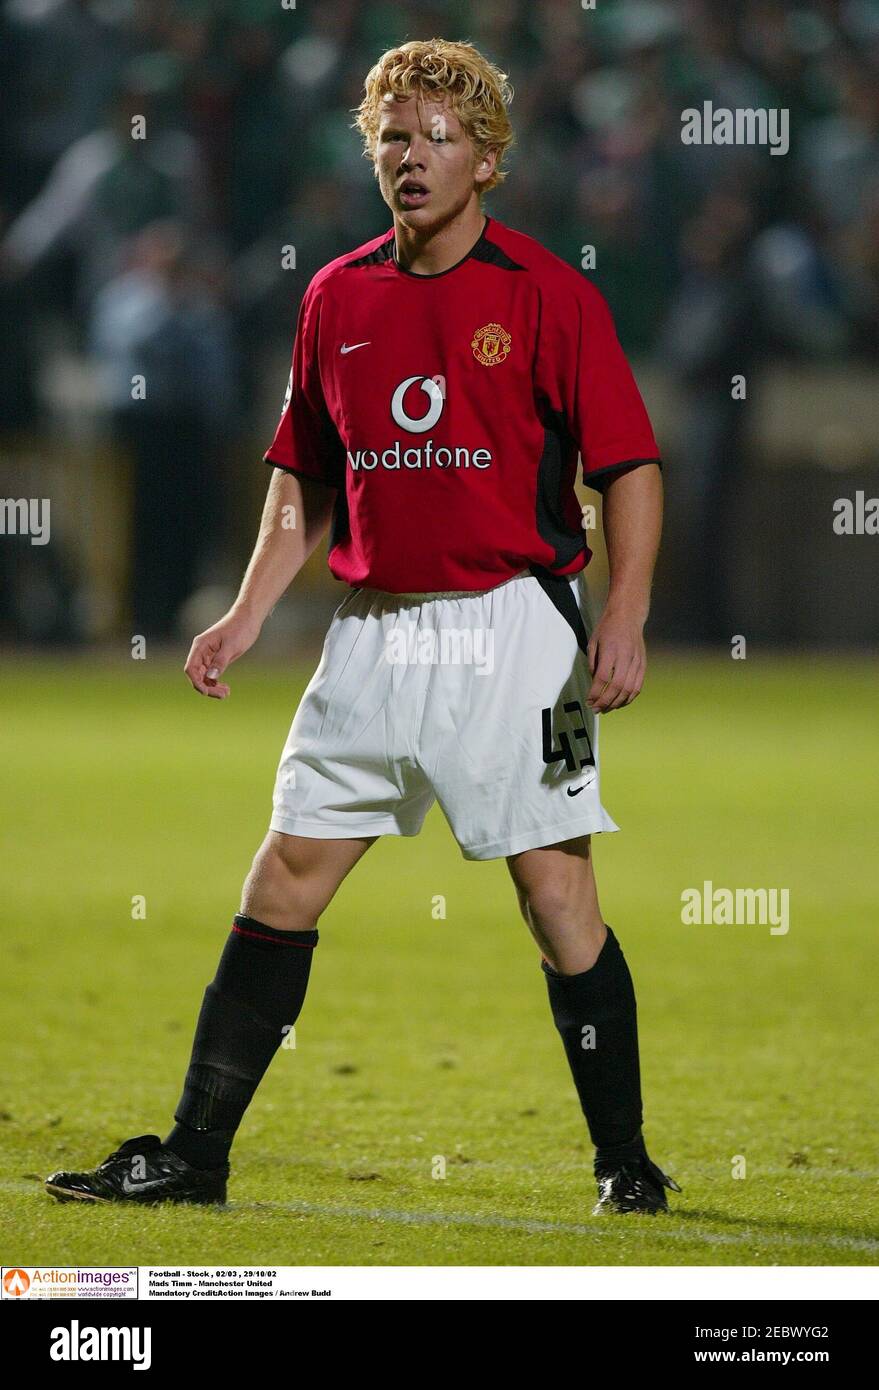 Football - , 02/03 , 29/10/02 Timm - Manchester United Mandatory Credit:Action Images / Andrew Budd Stock Photo - Alamy